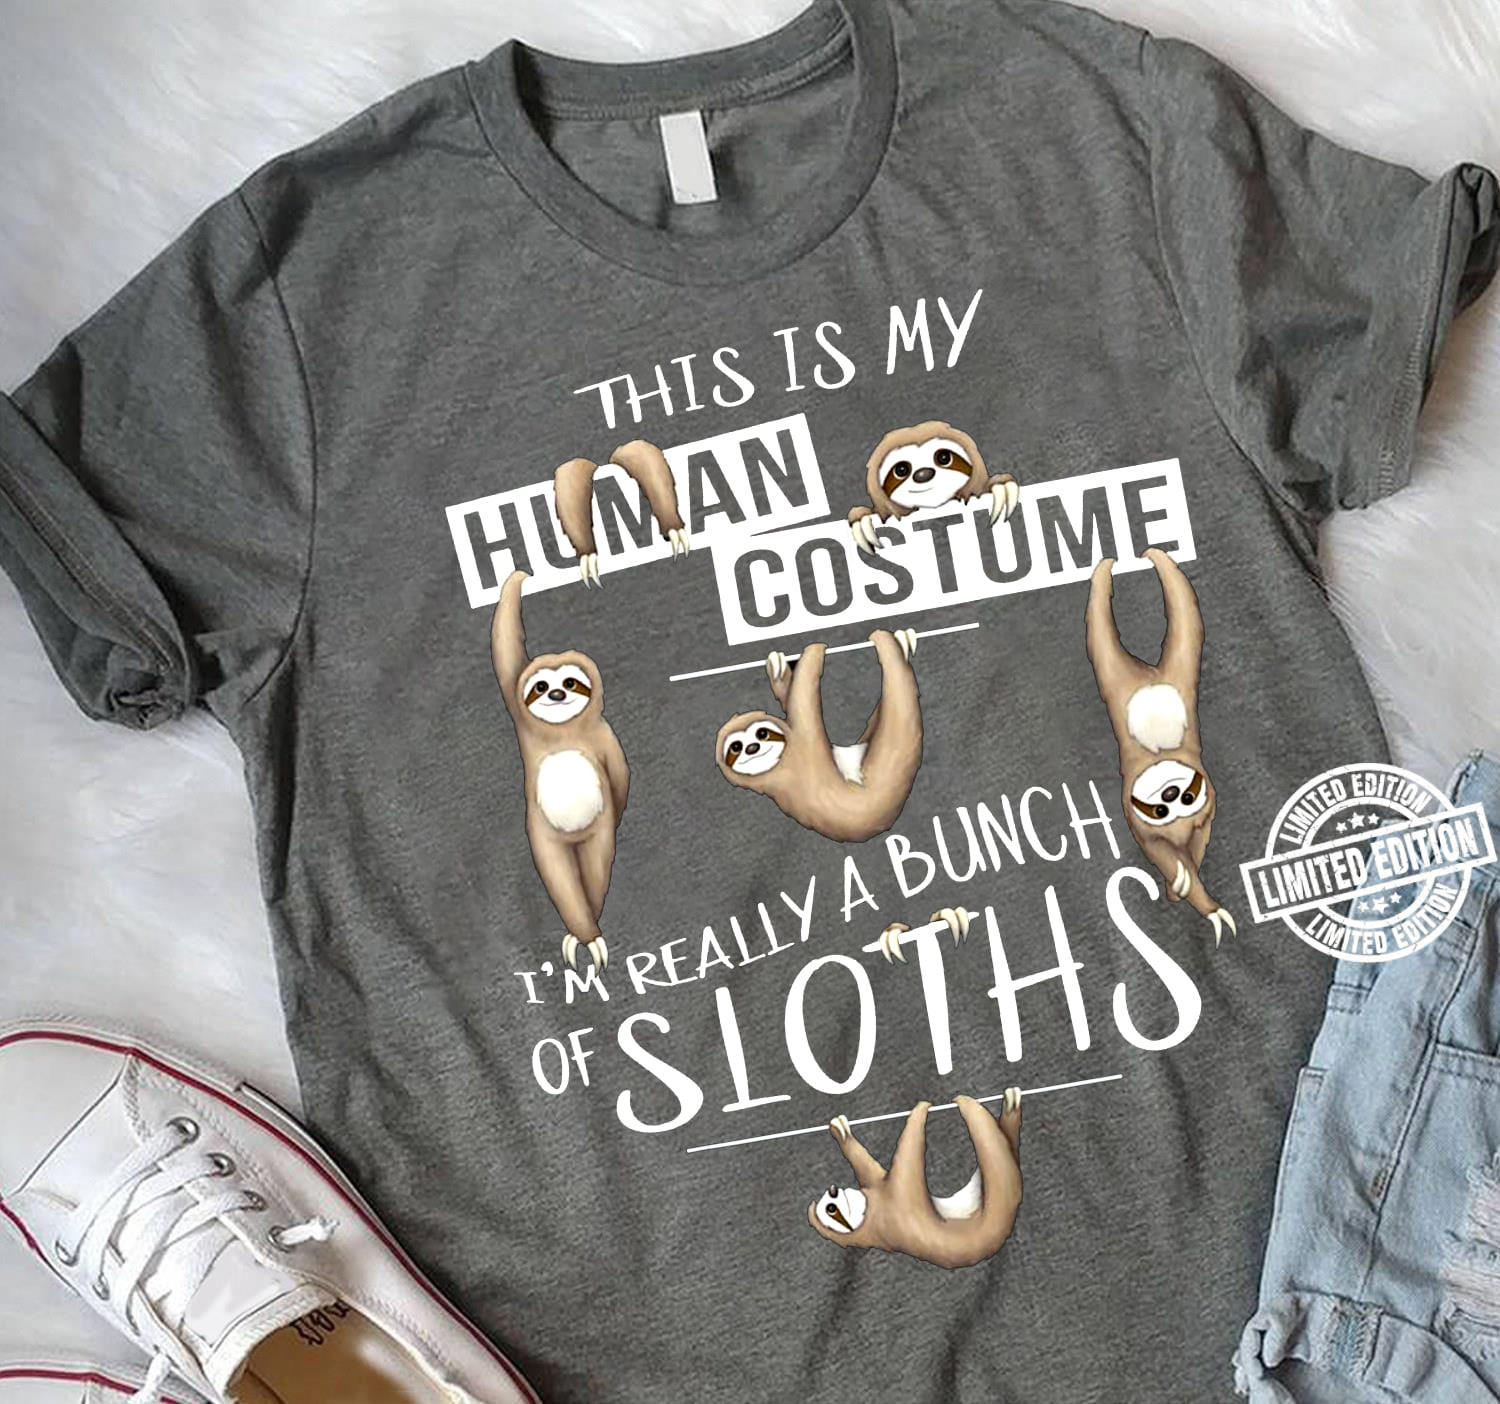 This is my human costume I'm really a bunch of Sloths - Sloth lover ...